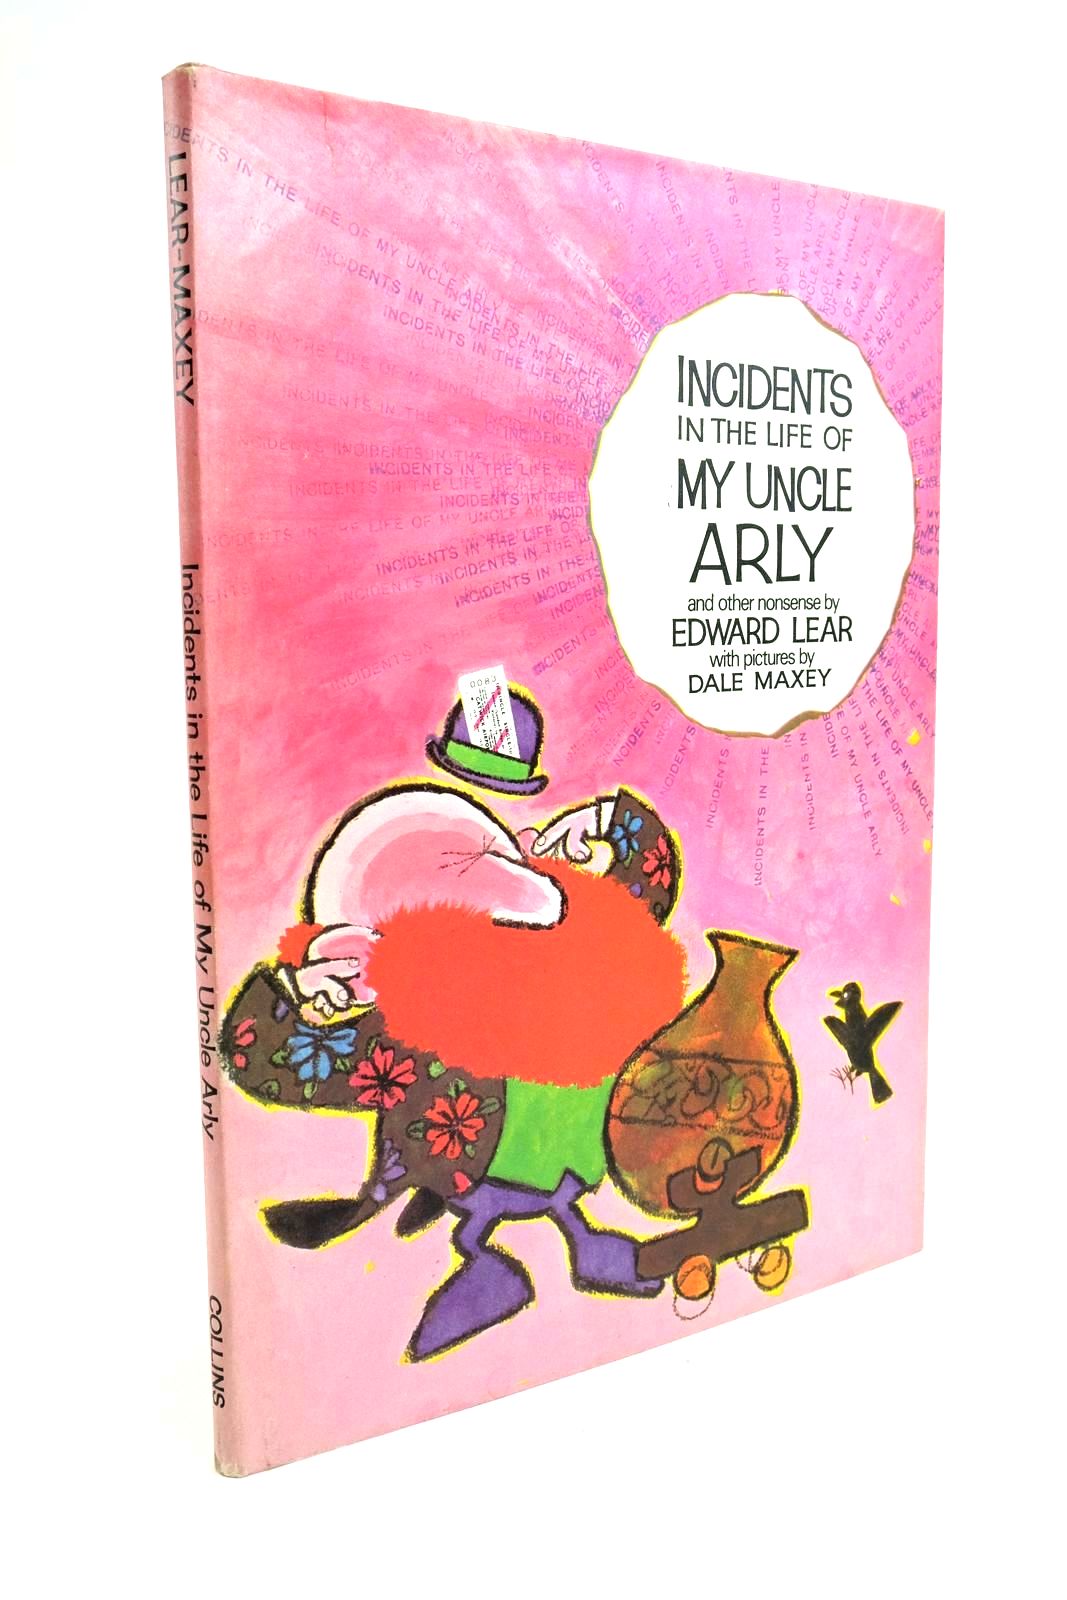 Photo of INCIDENTS IN THE LIFE OF MY UNCLE ARLY written by Lear, Edward illustrated by Maxey, Dale published by Collins (STOCK CODE: 1321691)  for sale by Stella & Rose's Books